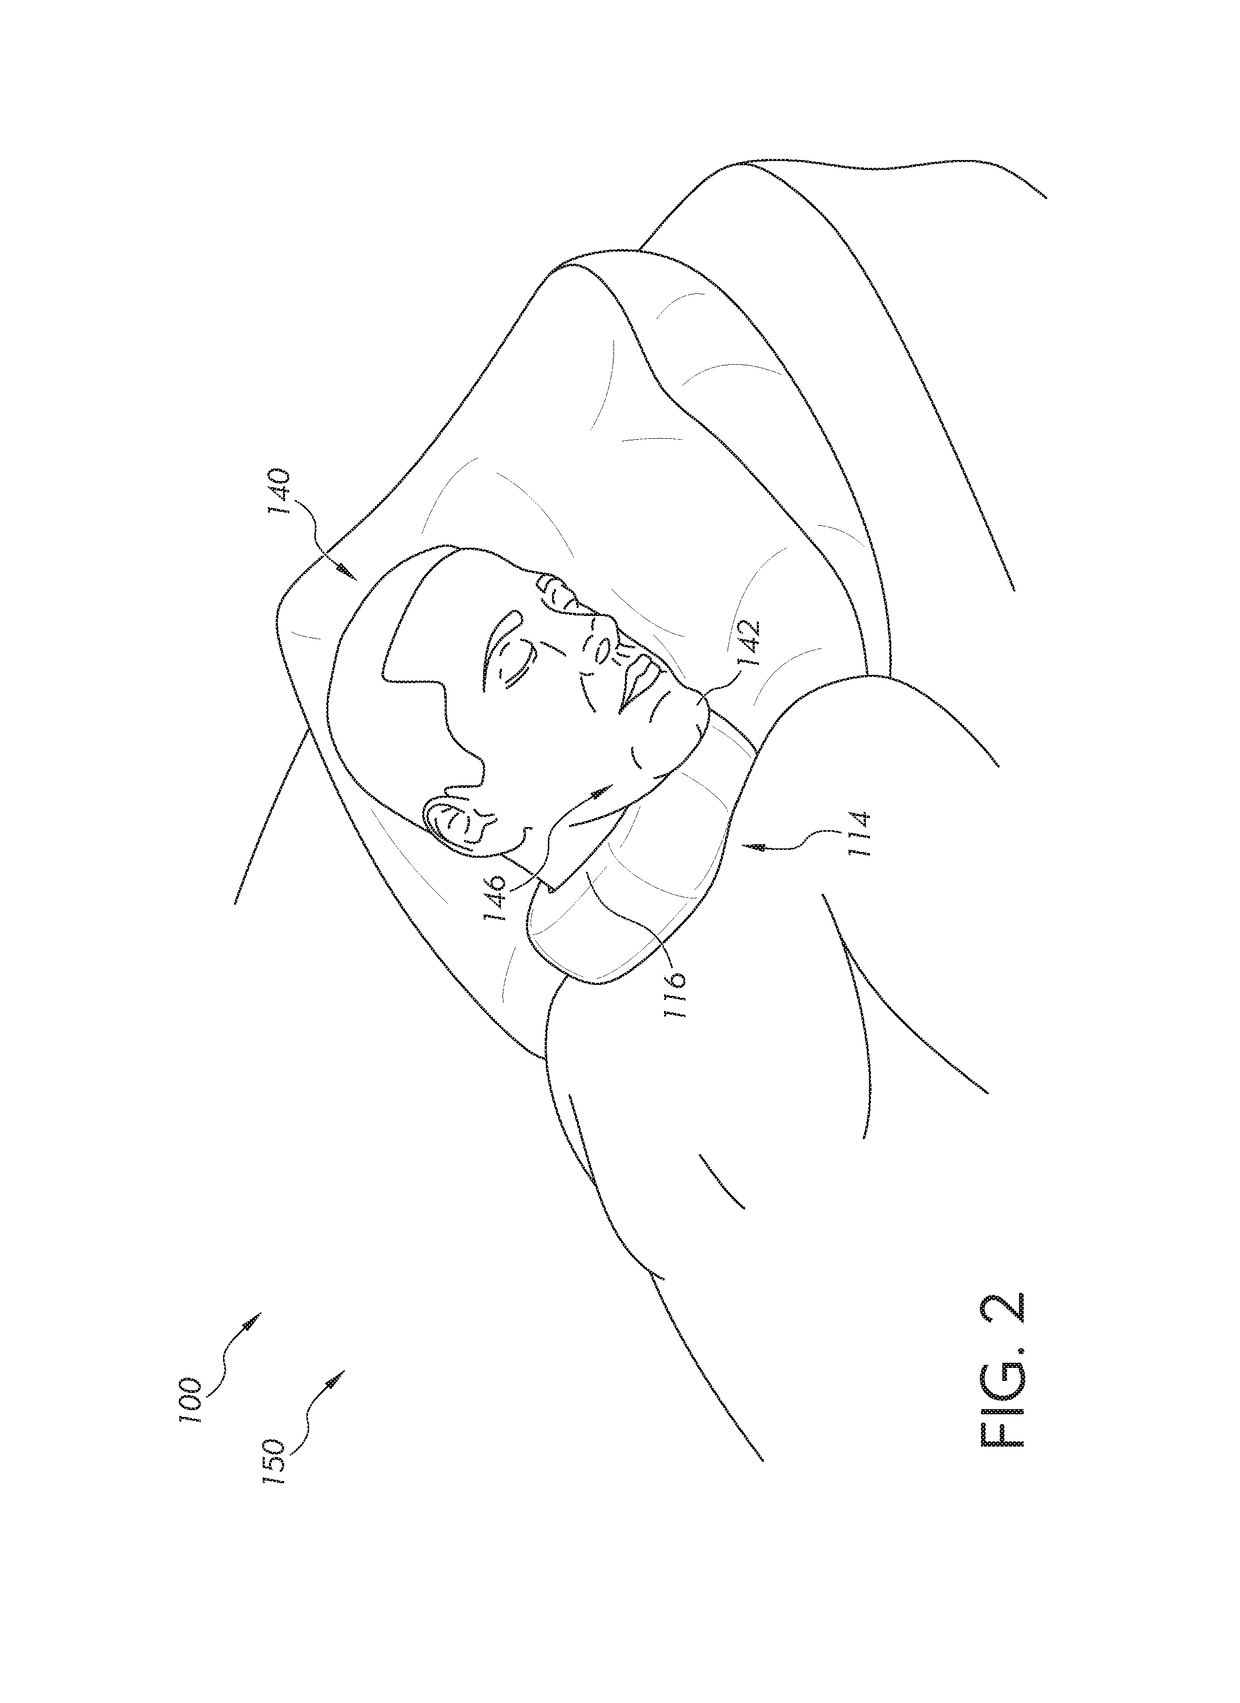 Wearable device for snoring